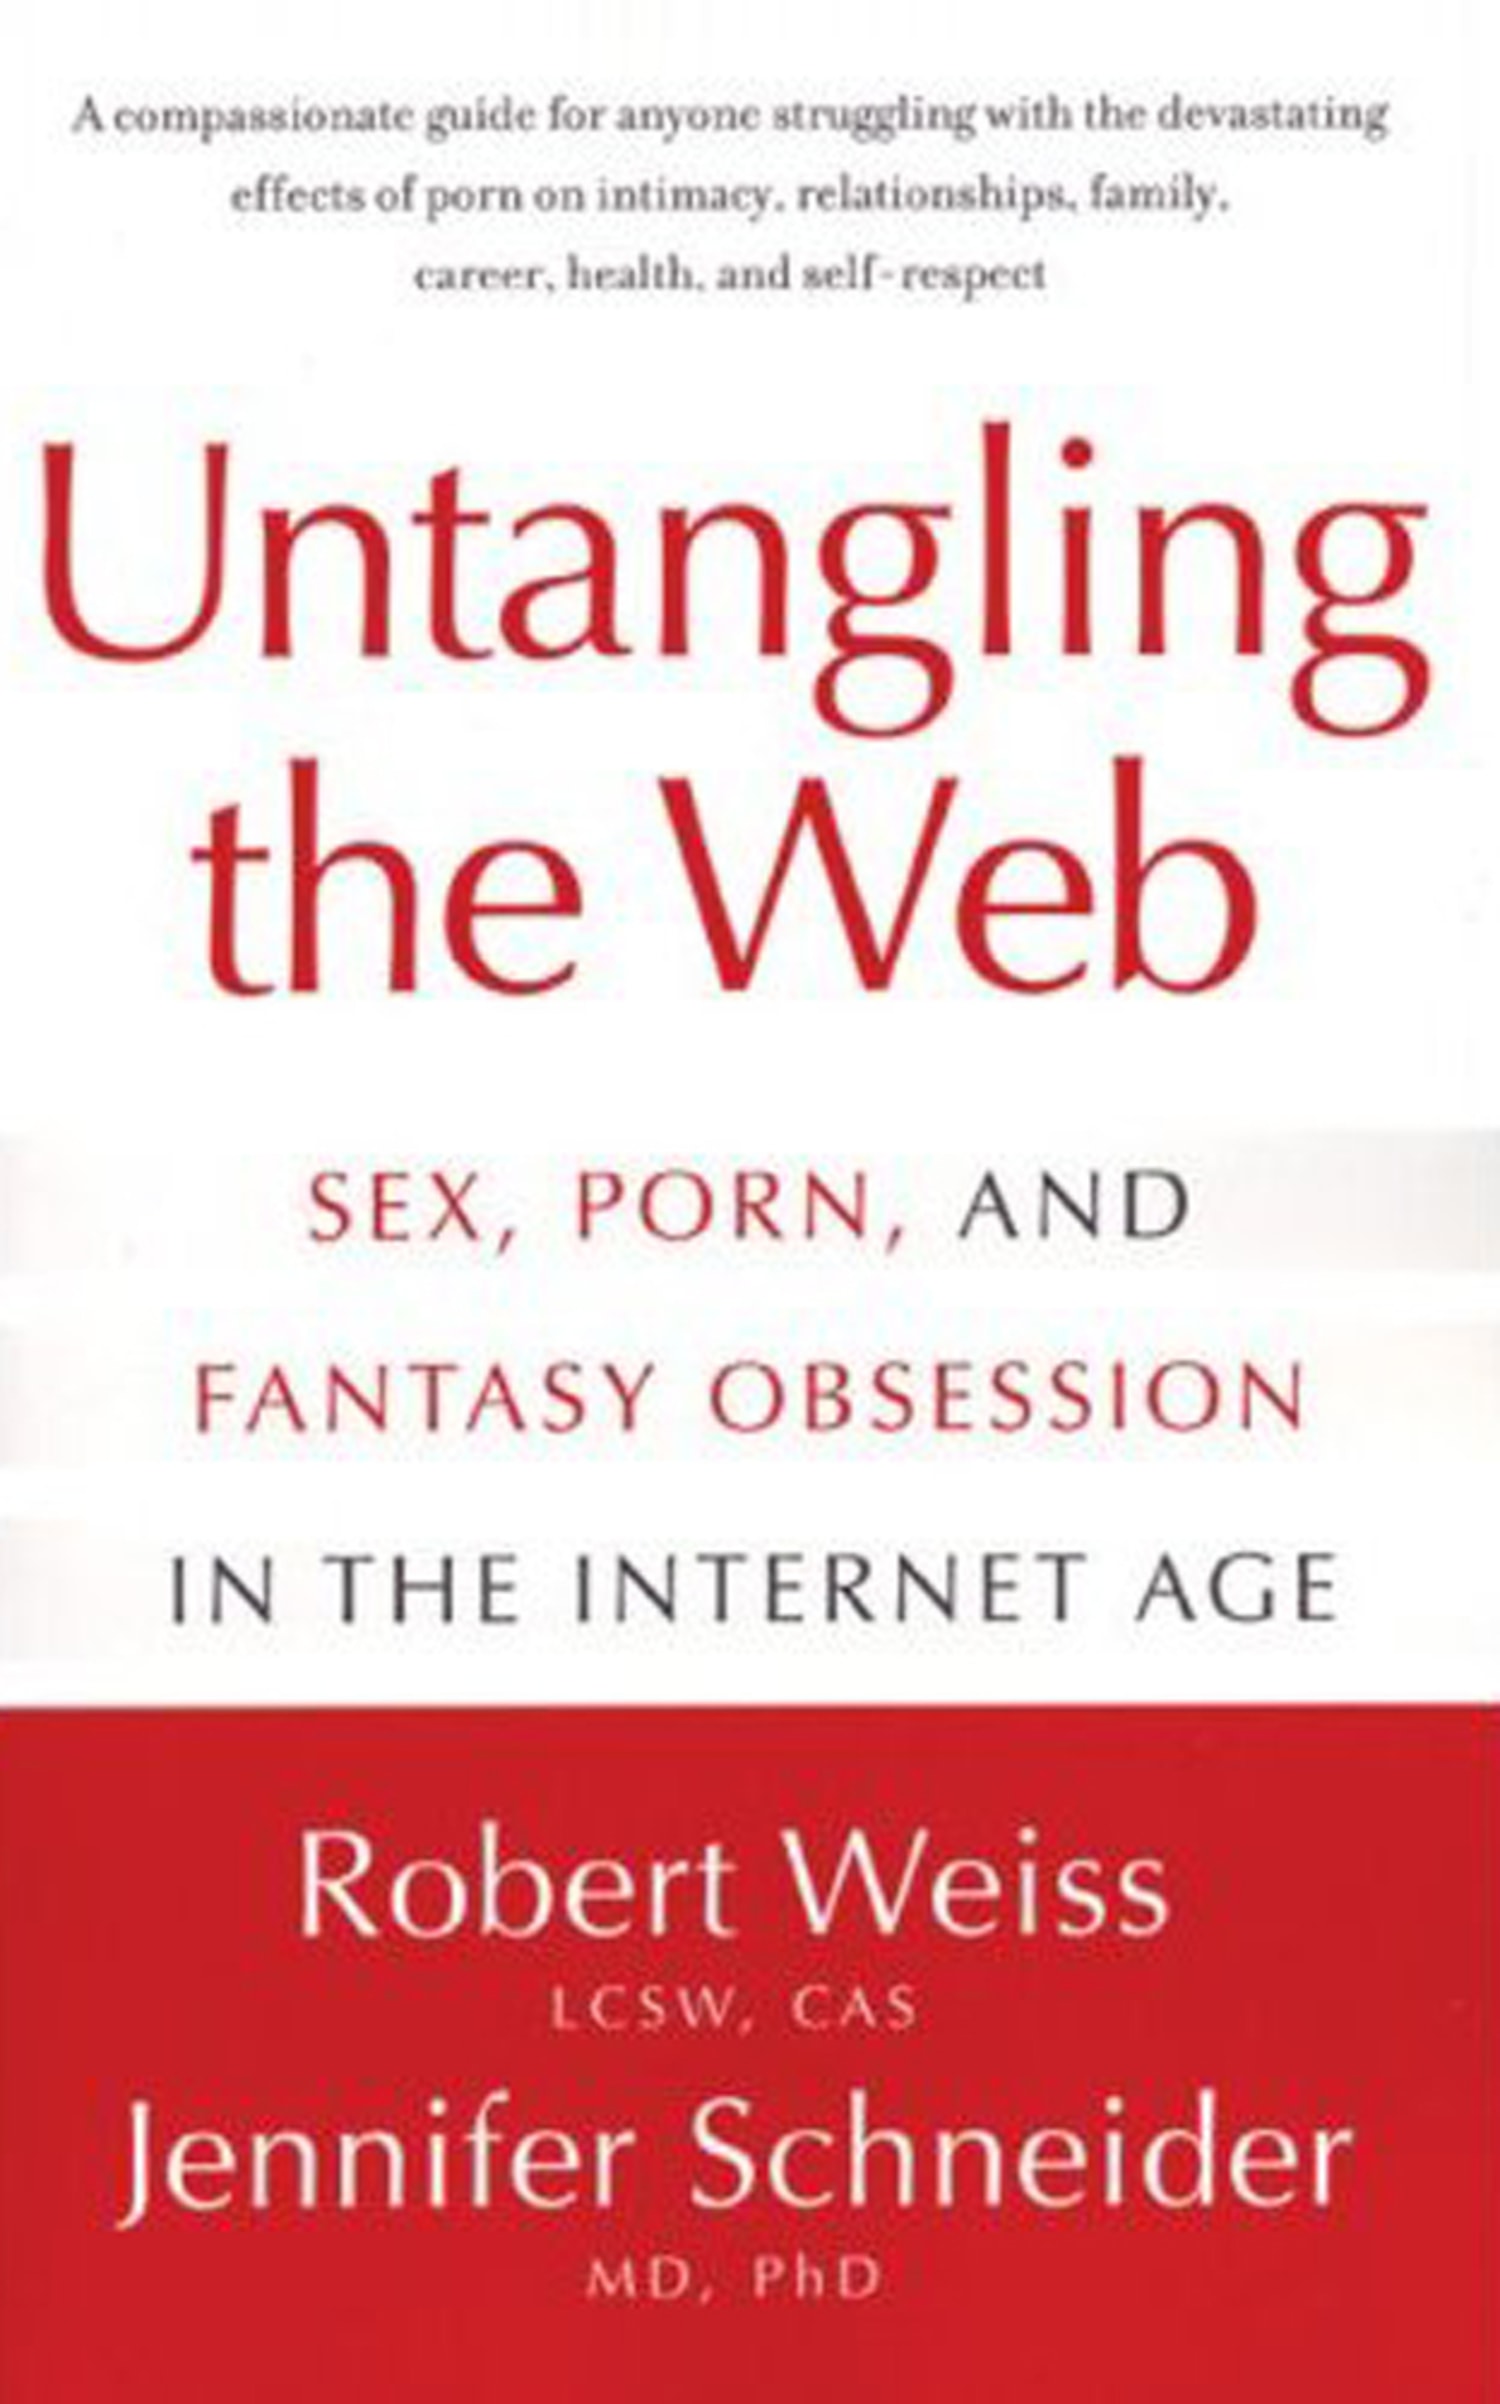 Fantasy obsession in the Internet age